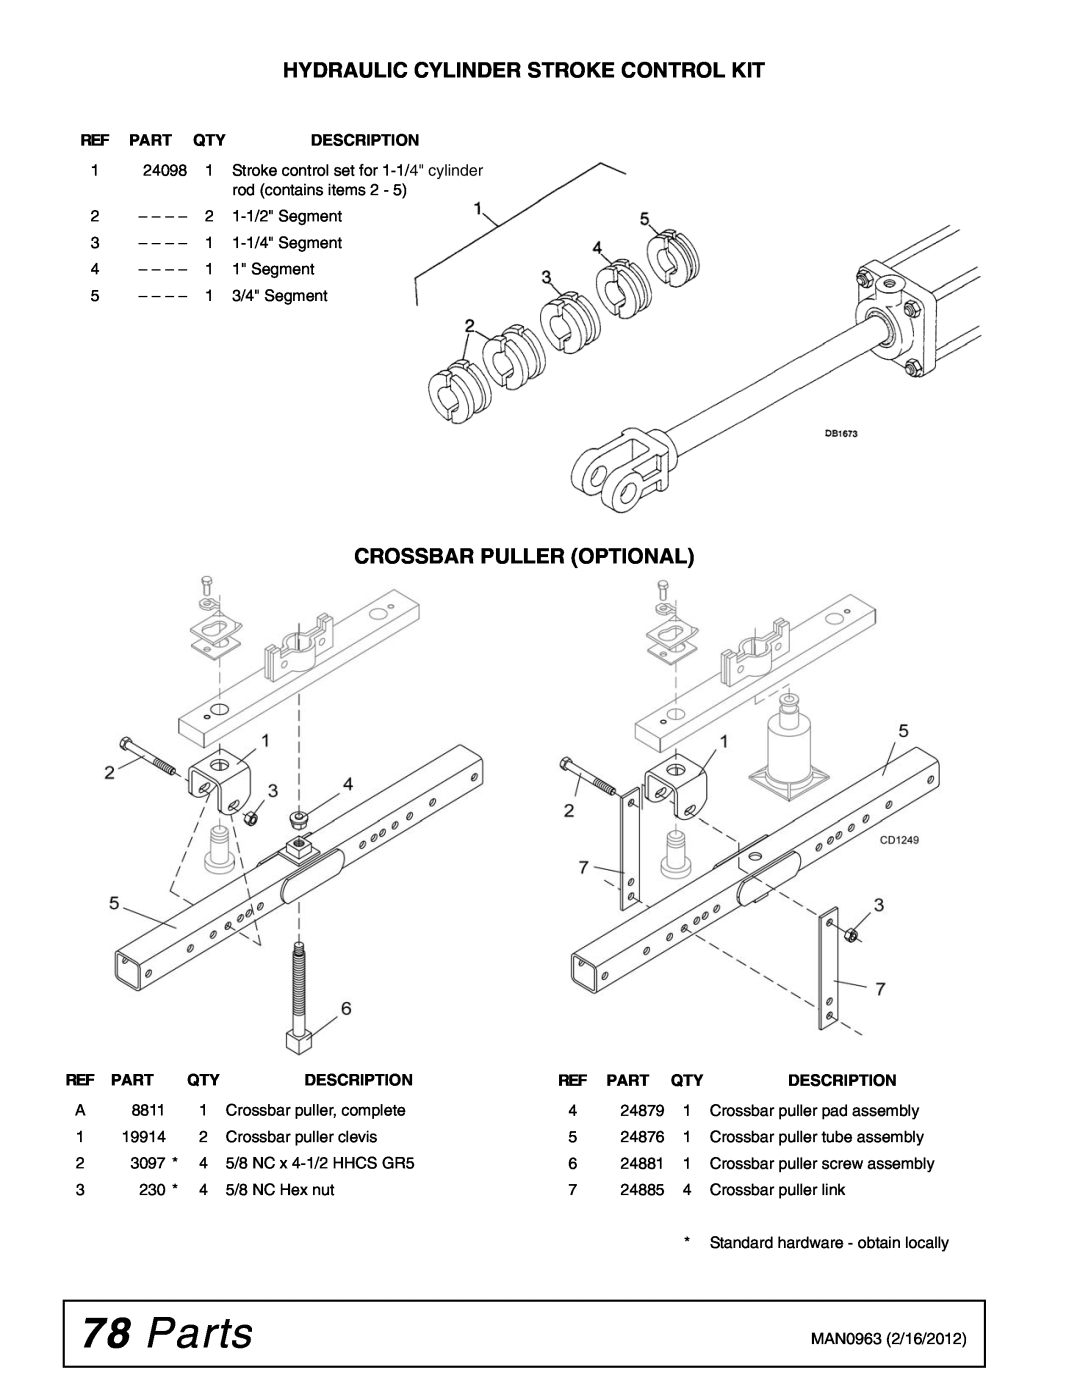 Woods Equipment BW126XHDQ, BW180XHDQ Parts, Crossbar Puller Optional, Hydraulic Cylinder Stroke Control Kit, Description 